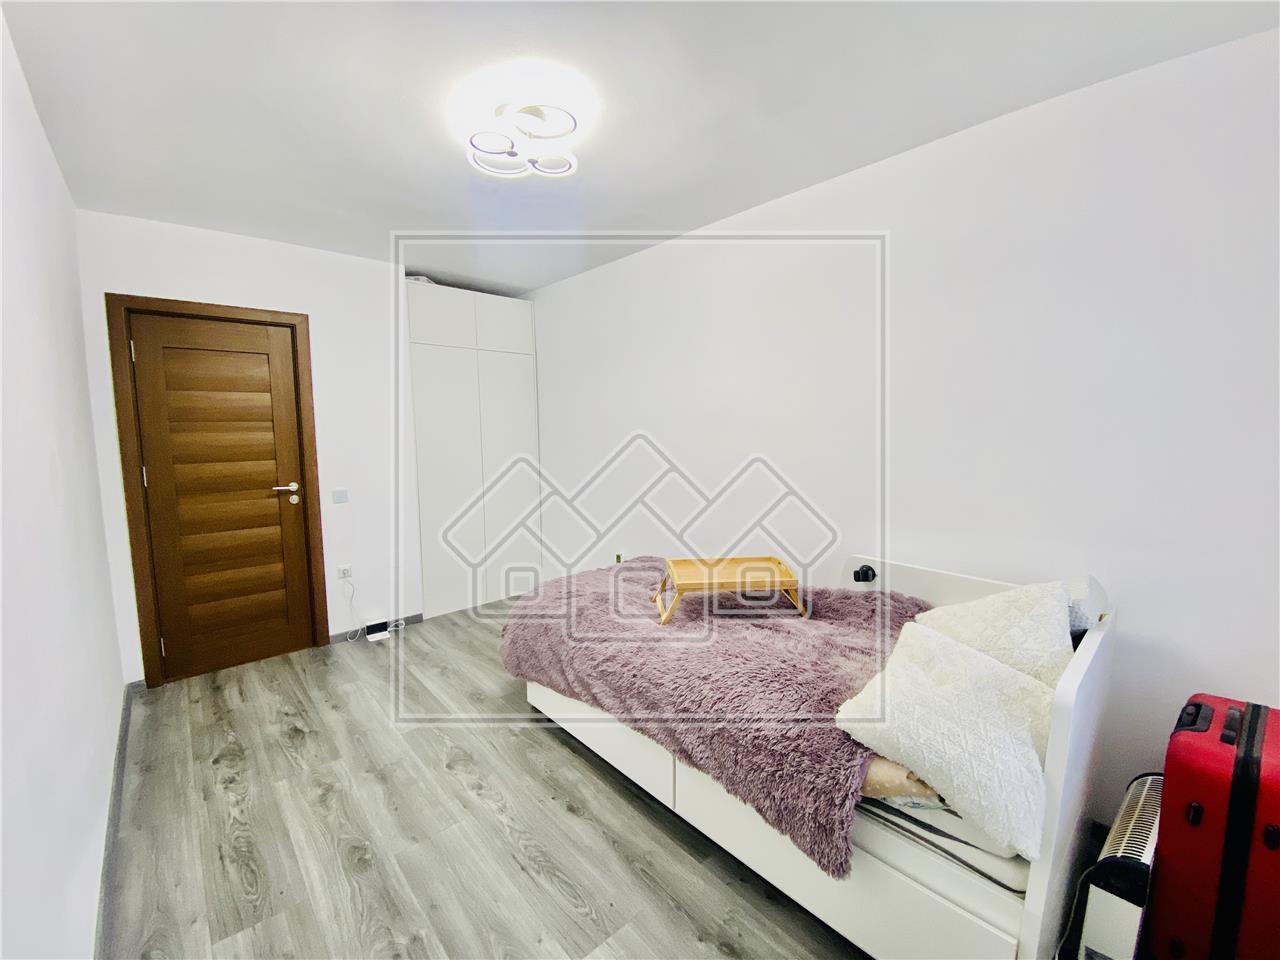 Apartament 2 rooms for sale in Sibiu - furnished and equipped